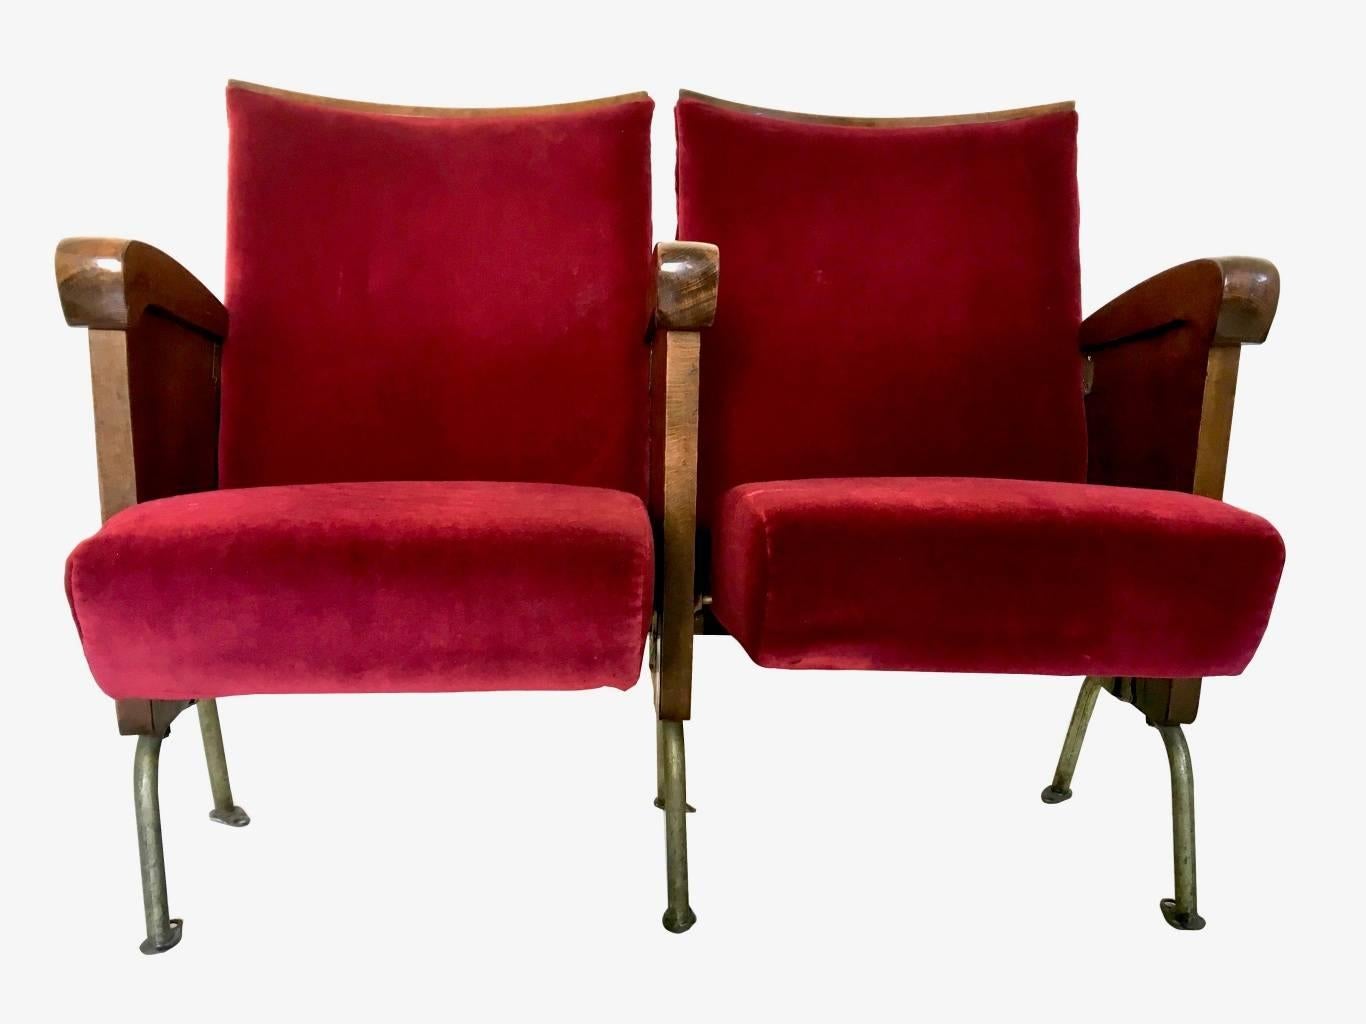 They feature a wooden structure, which is padded and upholstered in red velvet.
They also have metal parts.
Each set consists of a double bench.
The picture with the two sets and two single seats is just for illustrative purposes only, but we